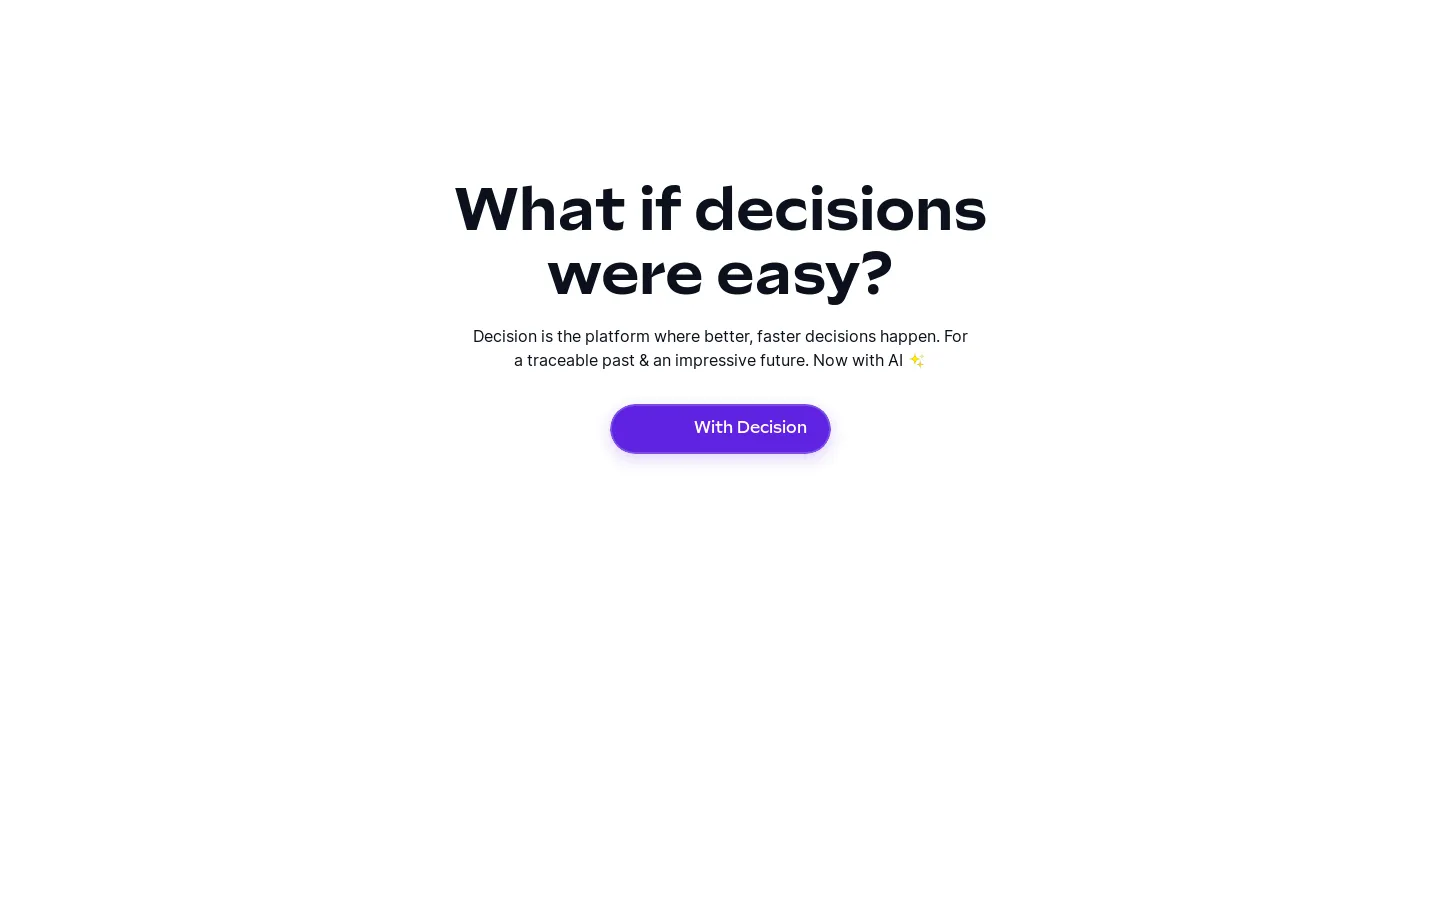 Decision: What if decisions were easy?